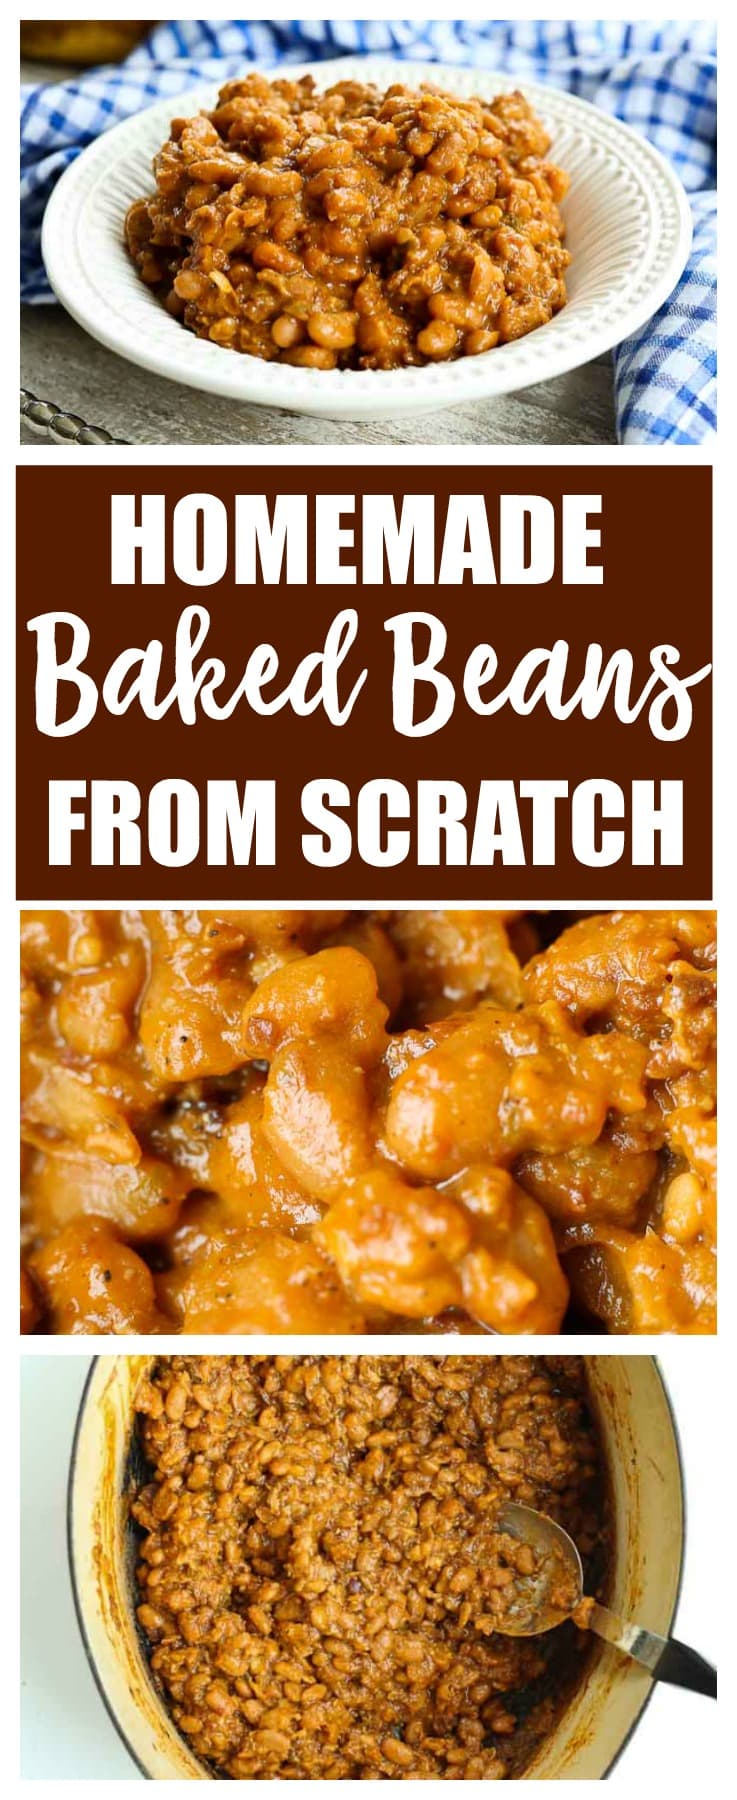 homemade baked beans from scratch | recipe | barbecue | summer | dried beans | clean eating | healthy homemade baked beans from scratch | recipe | barbecue | summer | dried beans | clean eating | healthy 